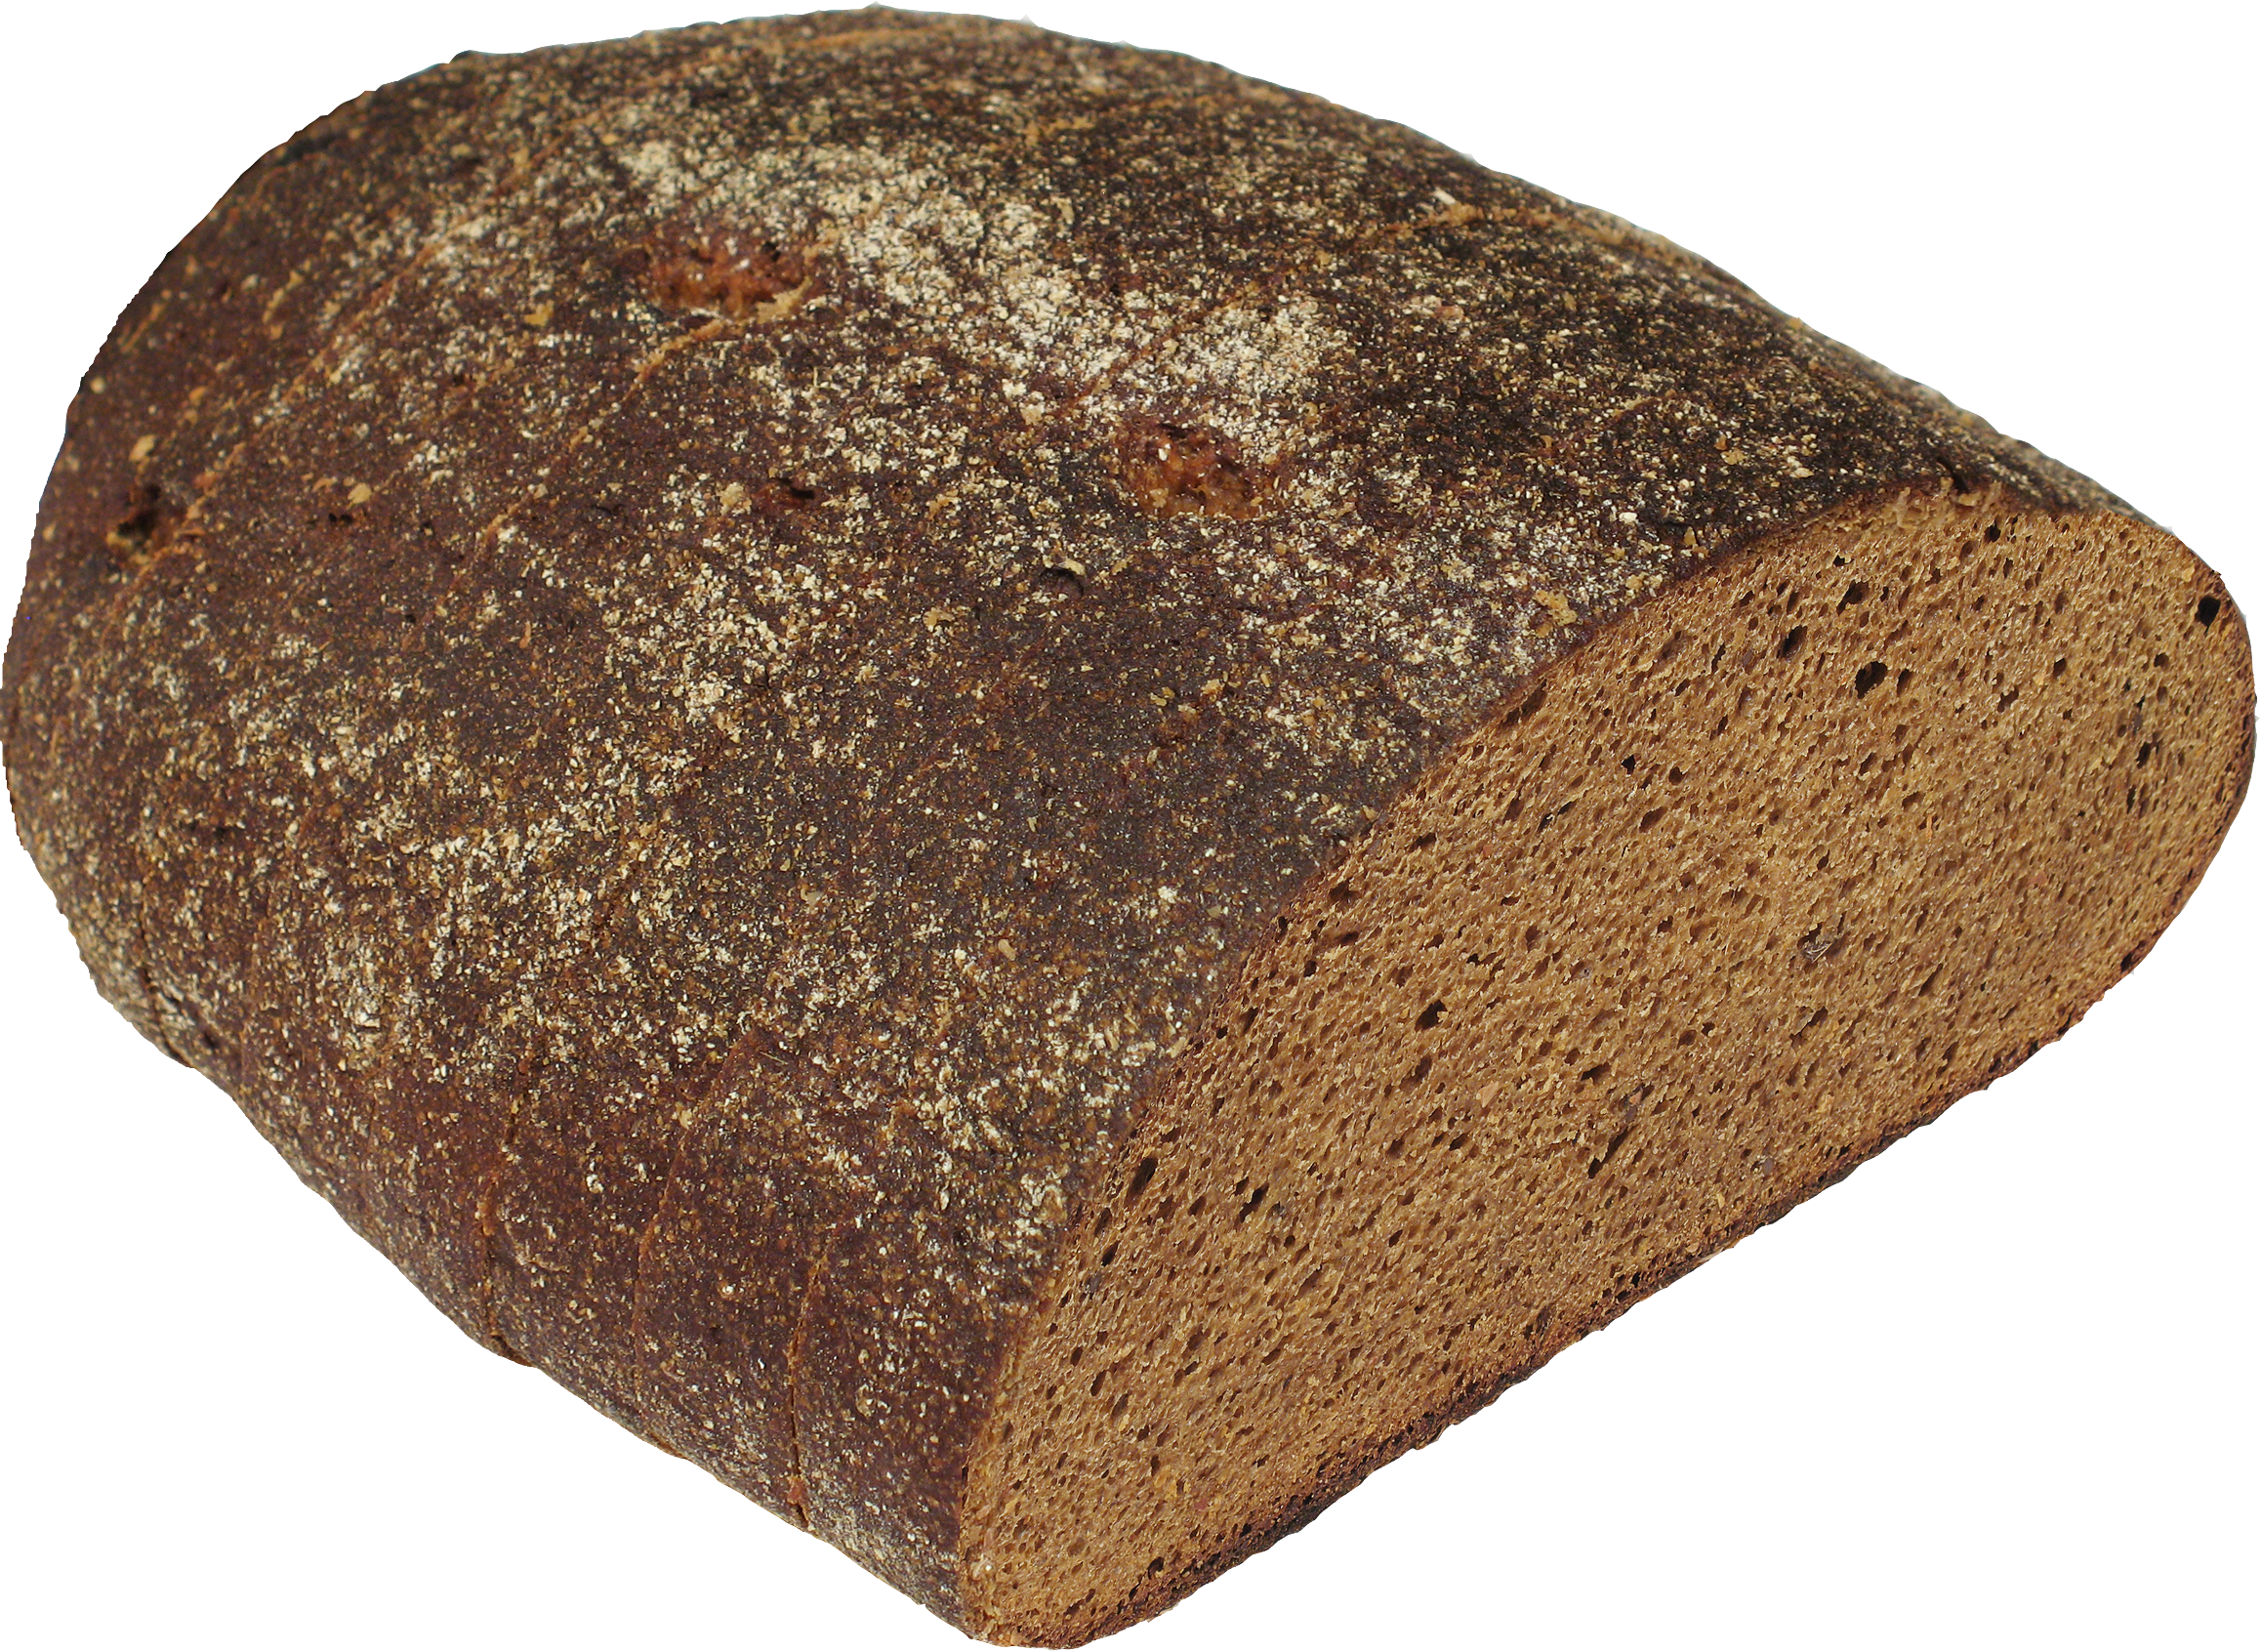 france clipart loaf bread